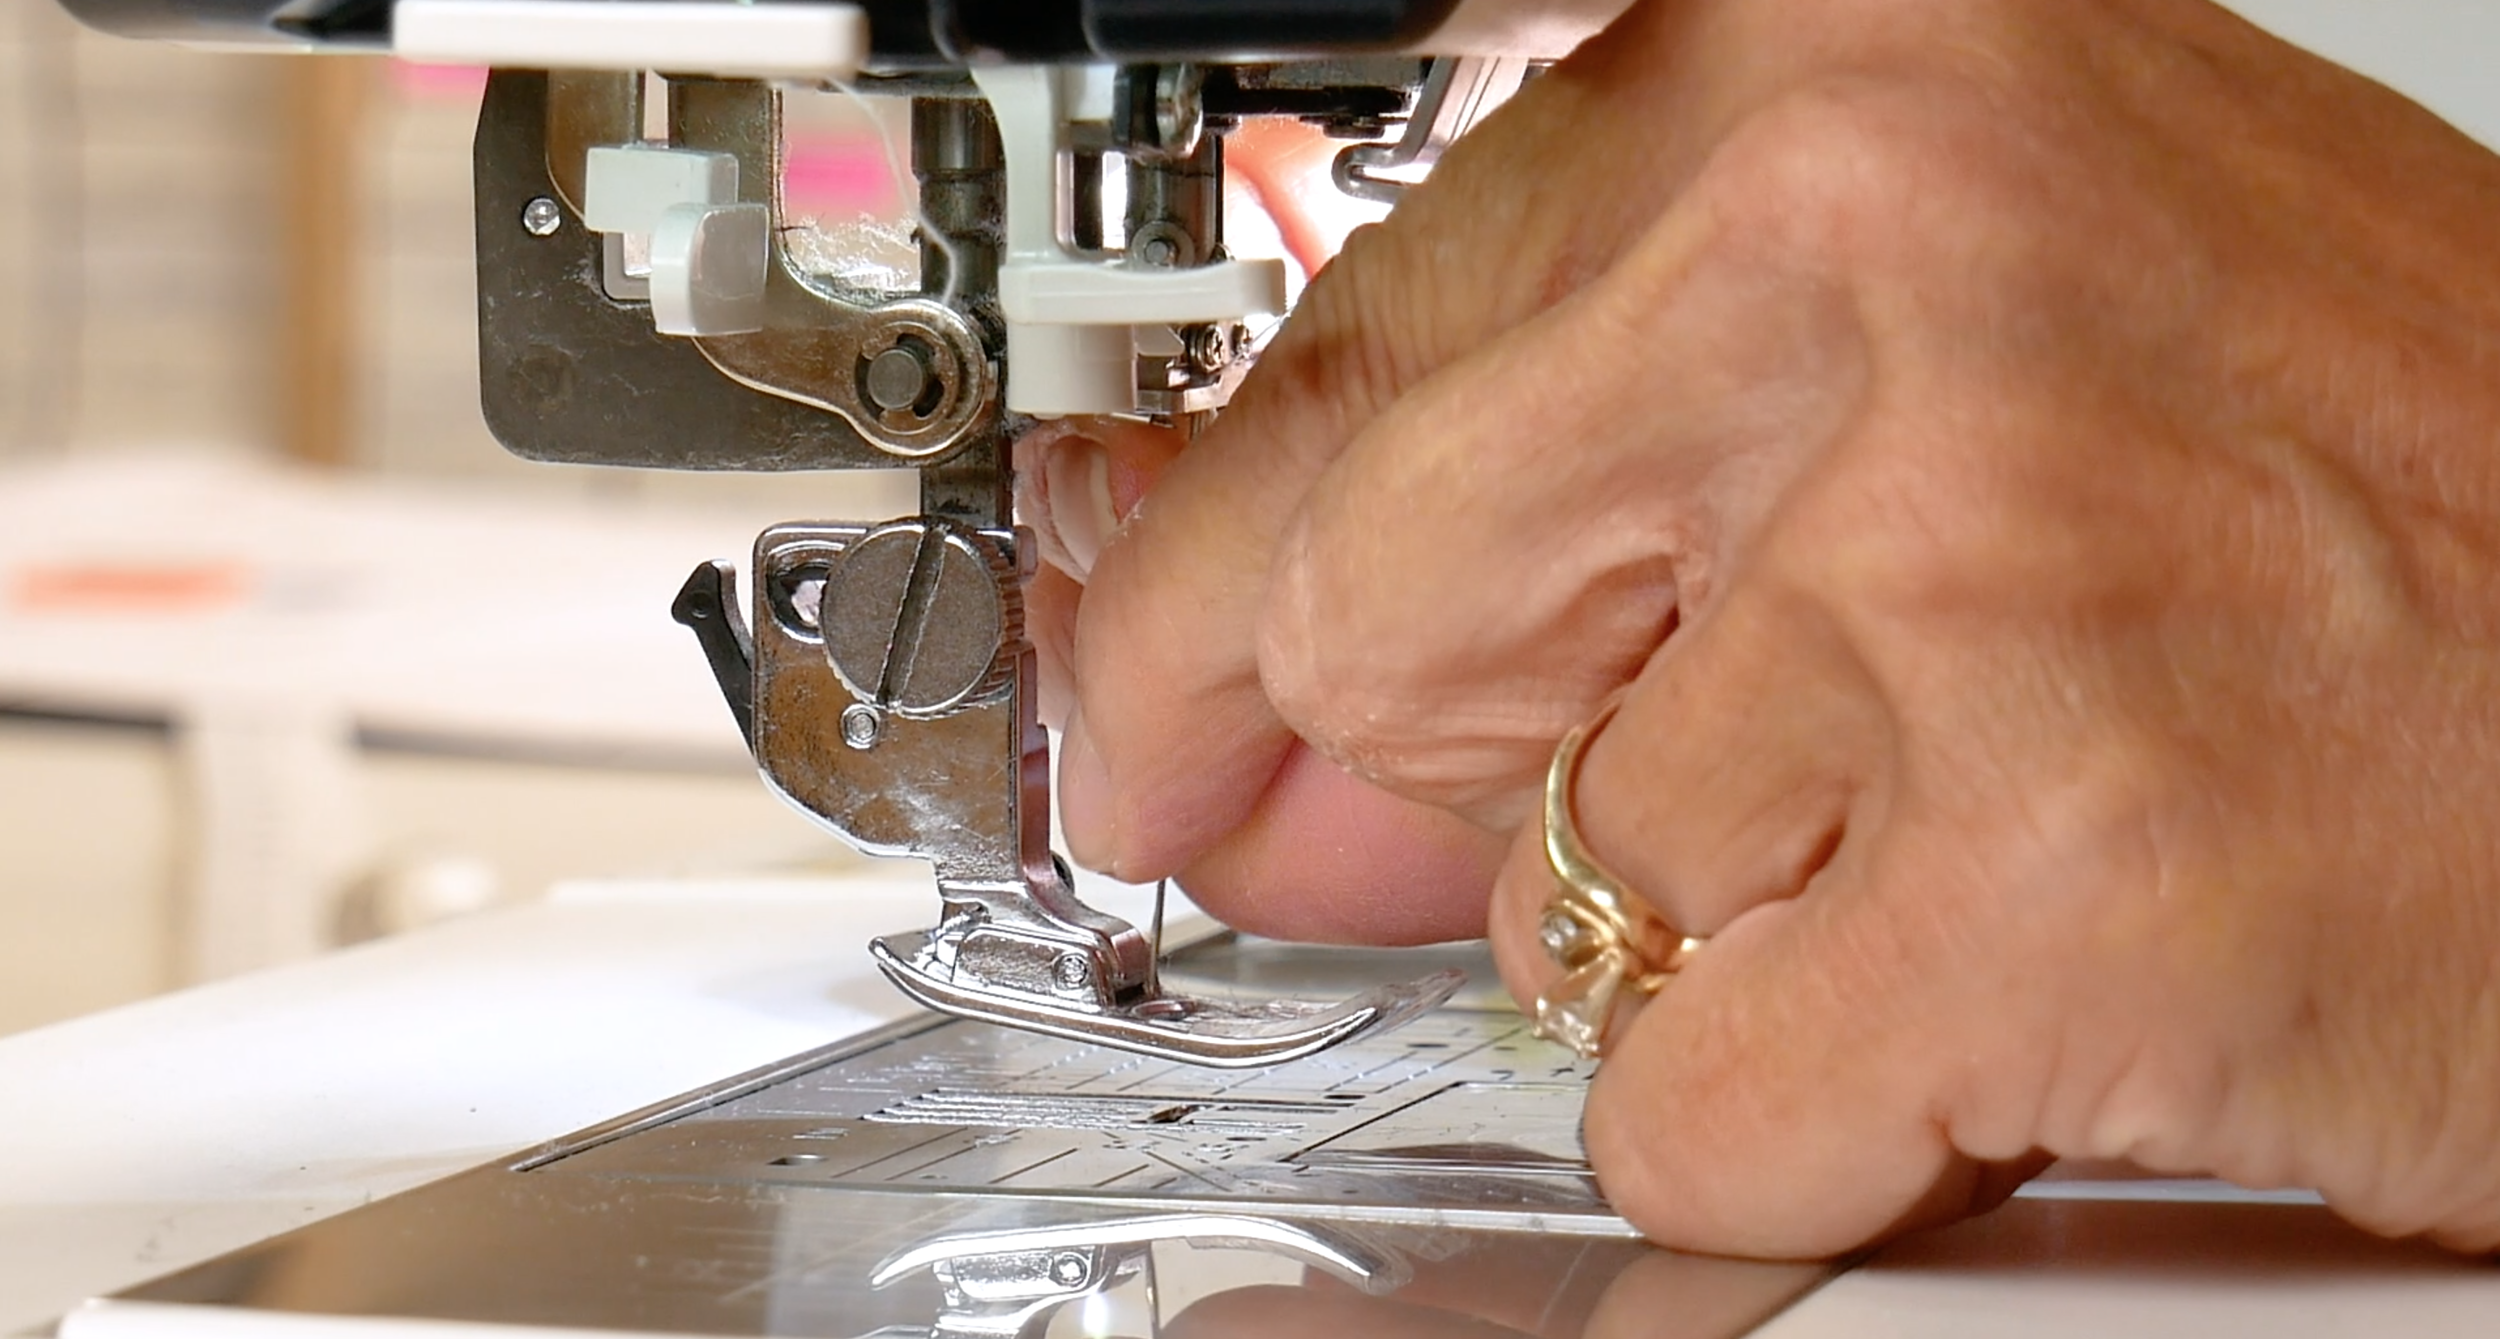 6 Reasons Your Sewing Machine Isn't Catching The Bobbin Thread